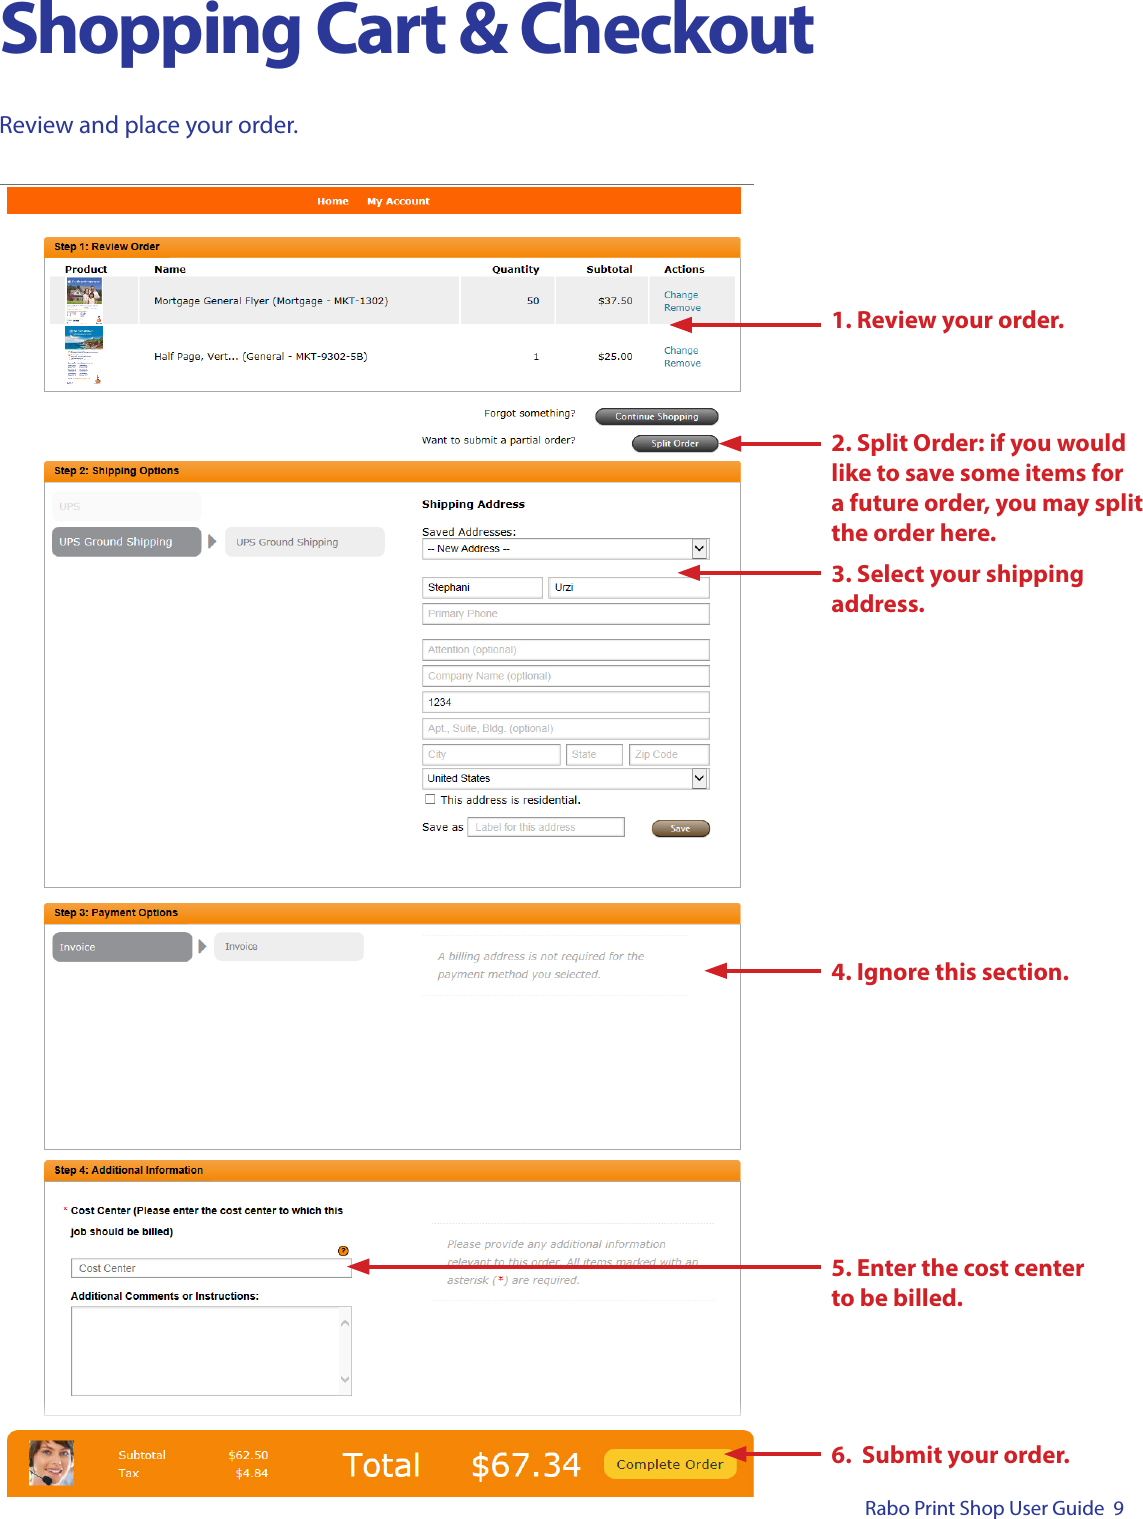 Page 9 of 10 - Rabo Print Shop User Guide